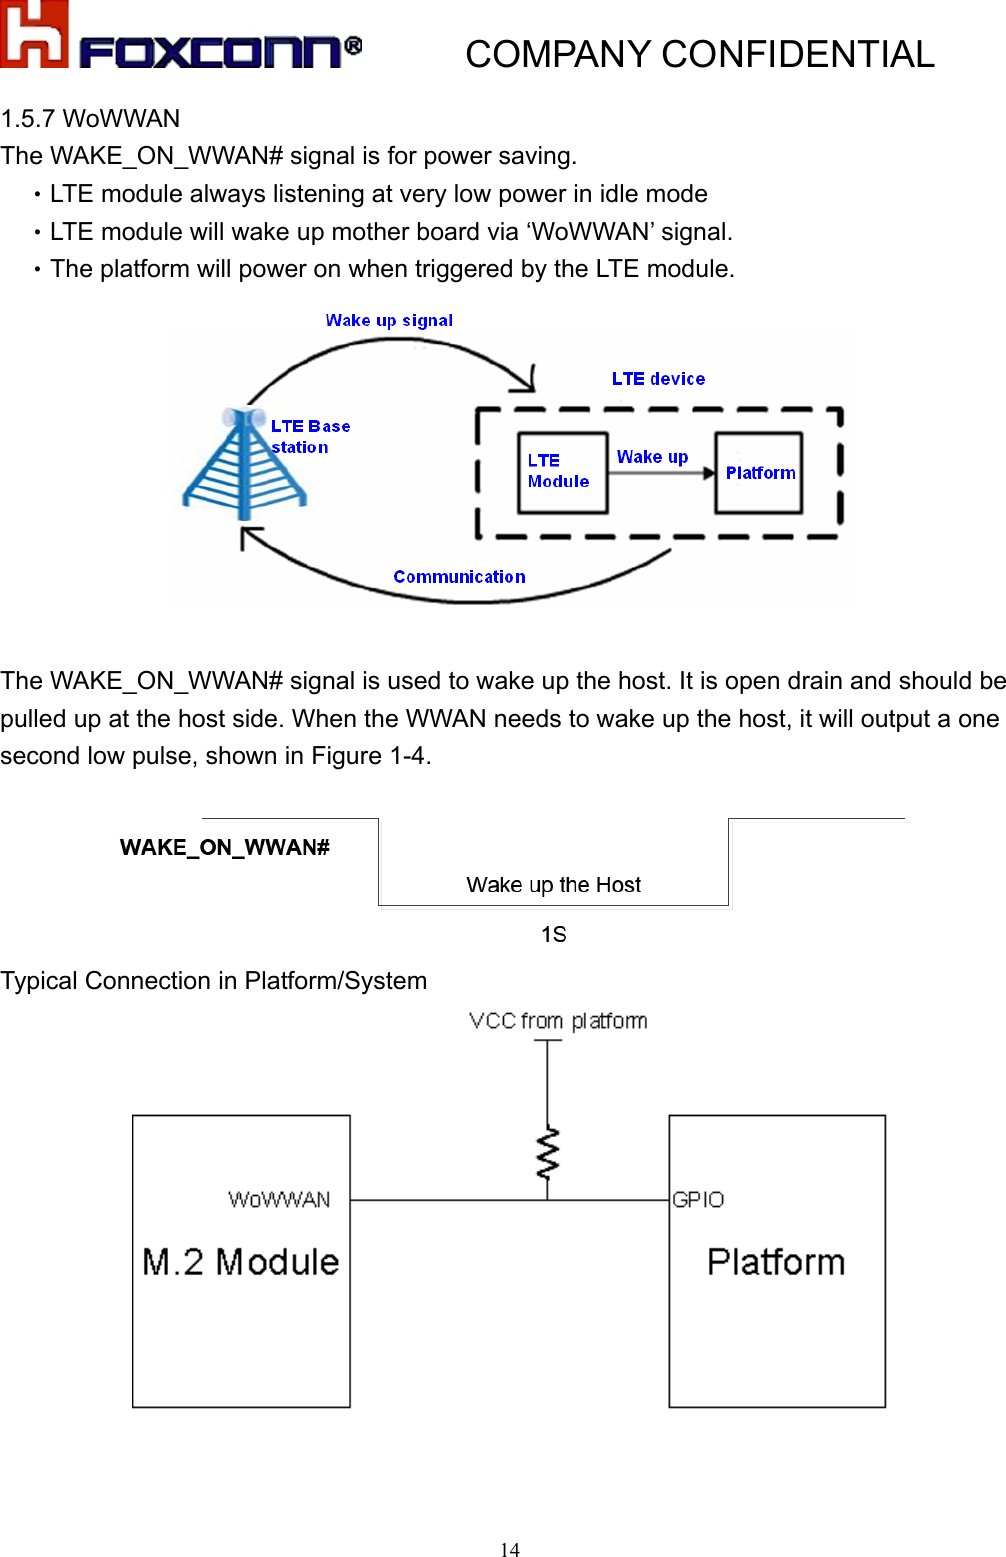           COMPANY CONFIDENTIAL   141.5.7 WoWWAN The WAKE_ON_WWAN# signal is for power saving.   •LTE module always listening at very low power in idle mode •LTE module will wake up mother board via ‘WoWWAN’ signal. •The platform will power on when triggered by the LTE module.   The WAKE_ON_WWAN# signal is used to wake up the host. It is open drain and should be pulled up at the host side. When the WWAN needs to wake up the host, it will output a one second low pulse, shown in Figure 1-4.  Typical Connection in Platform/System   